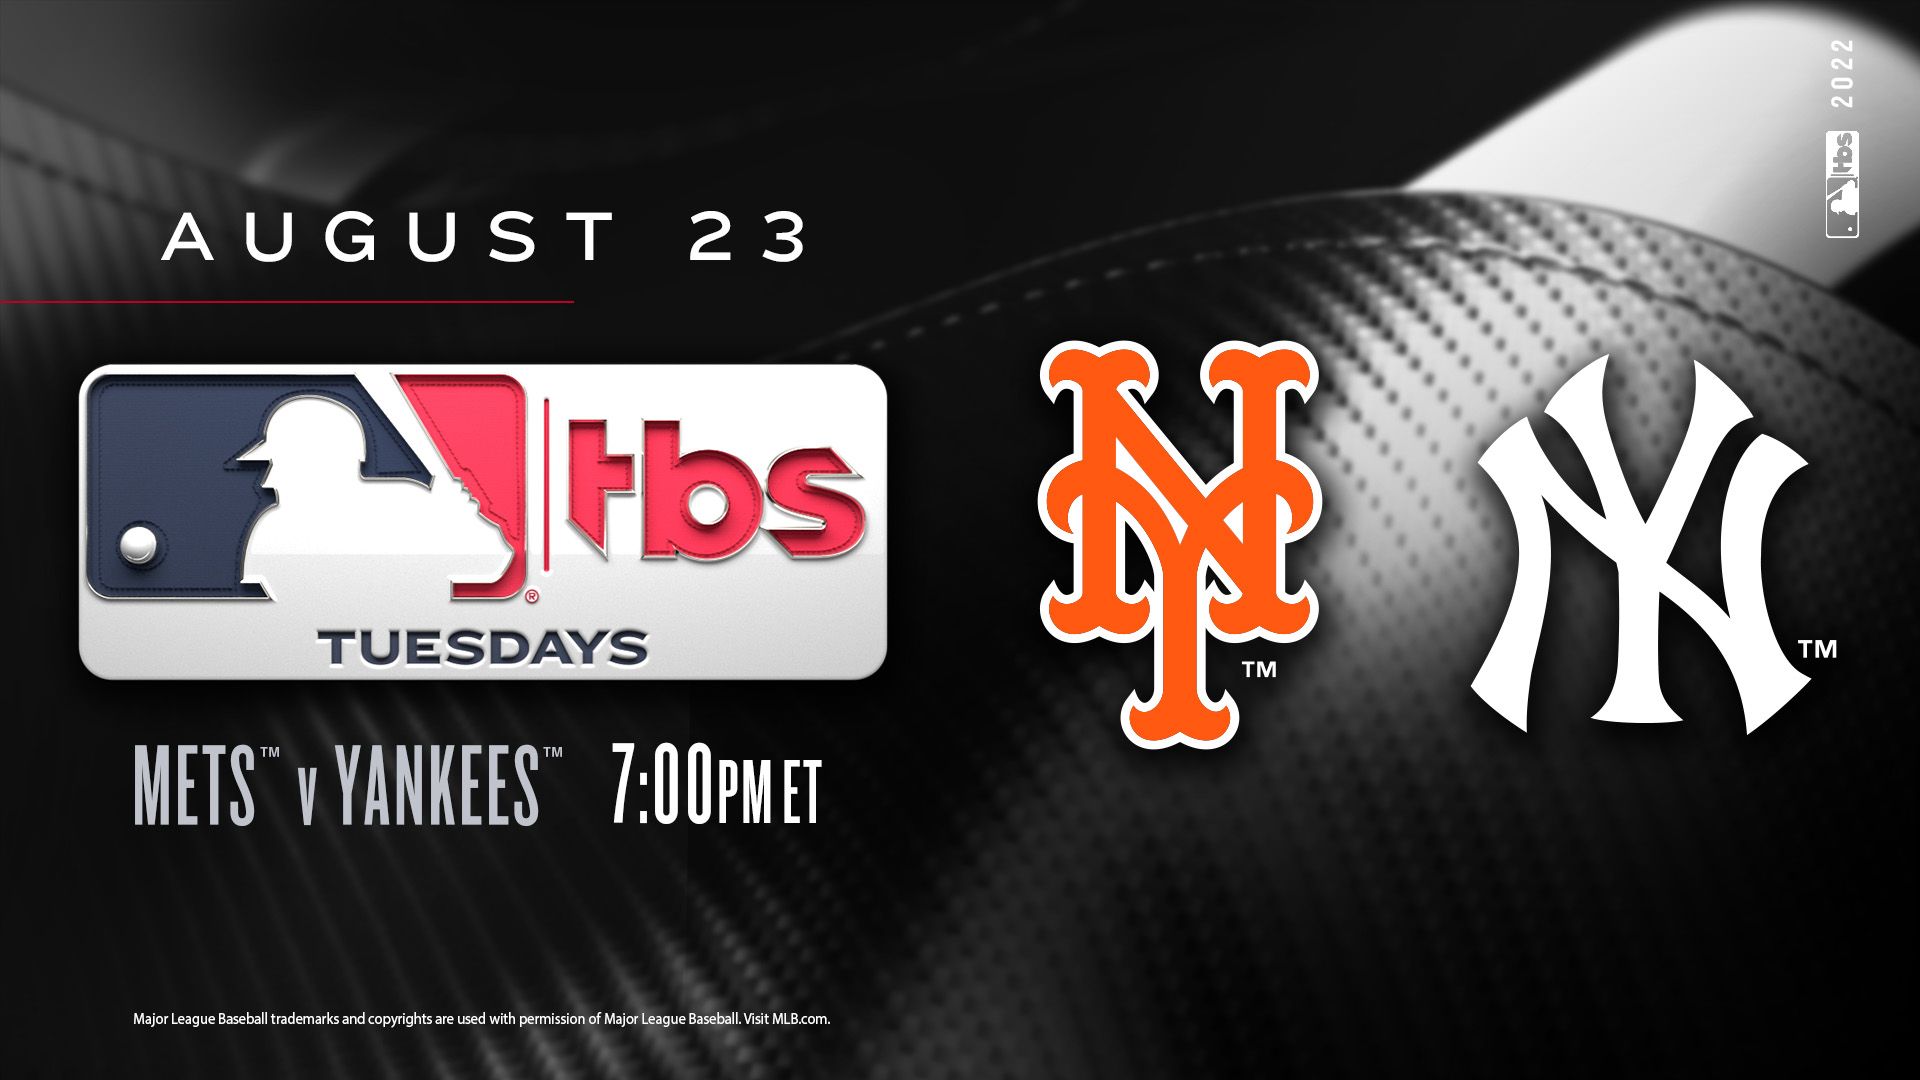 MLB on TBS Tuesday Night to Feature Division Leaders in the Subway Series –  New York Mets vs. New York Yankees – Tomorrow, Tuesday, Aug. 23, at 7 p.m.  ET